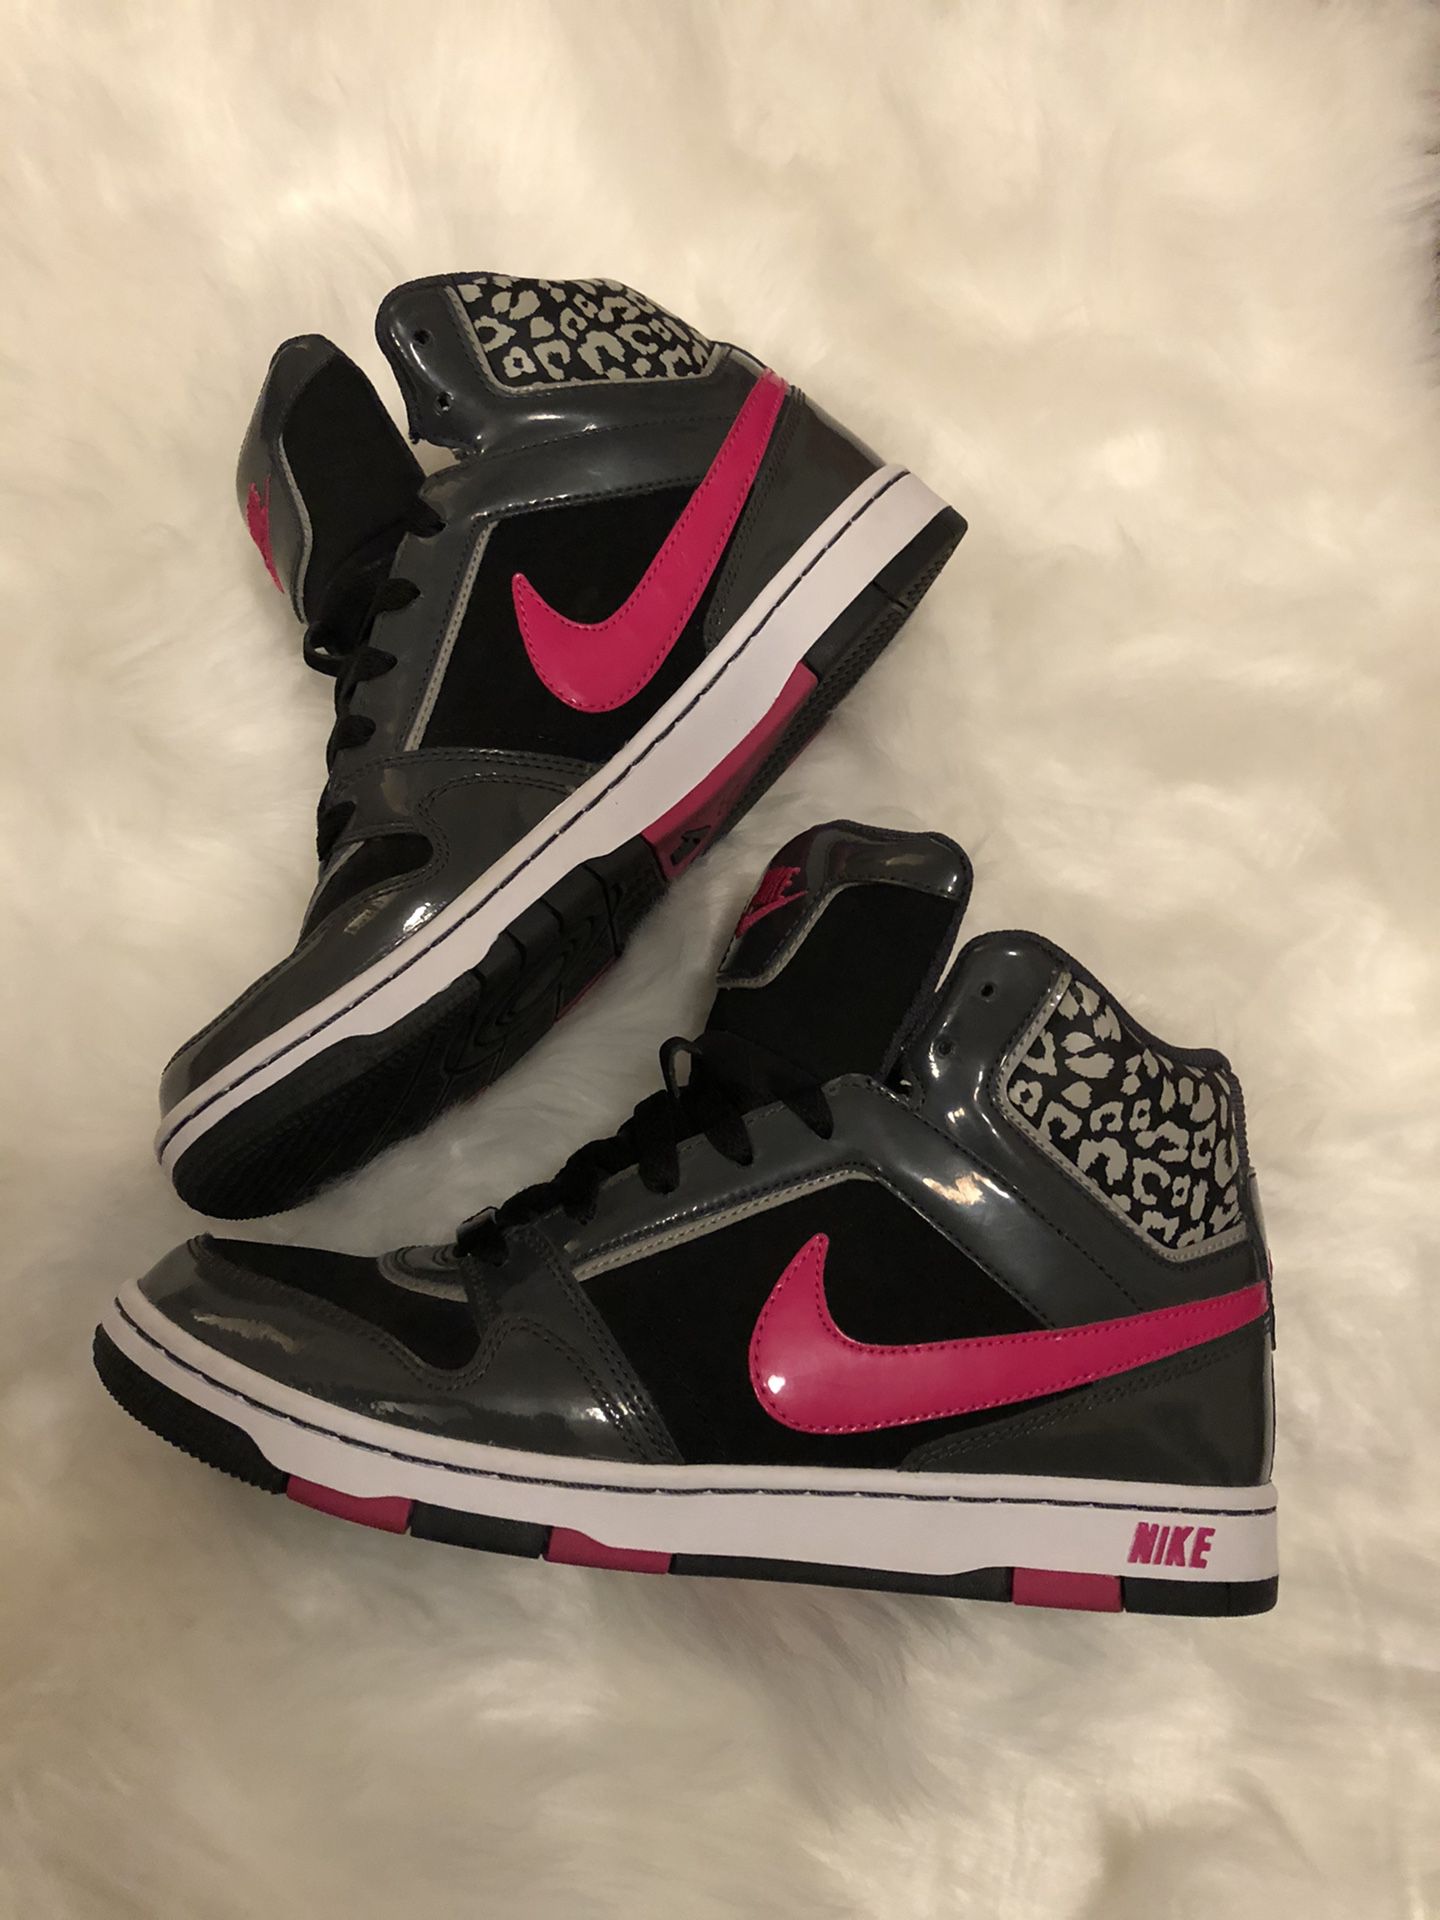 Woman’s vintage high top Nike’s size 9